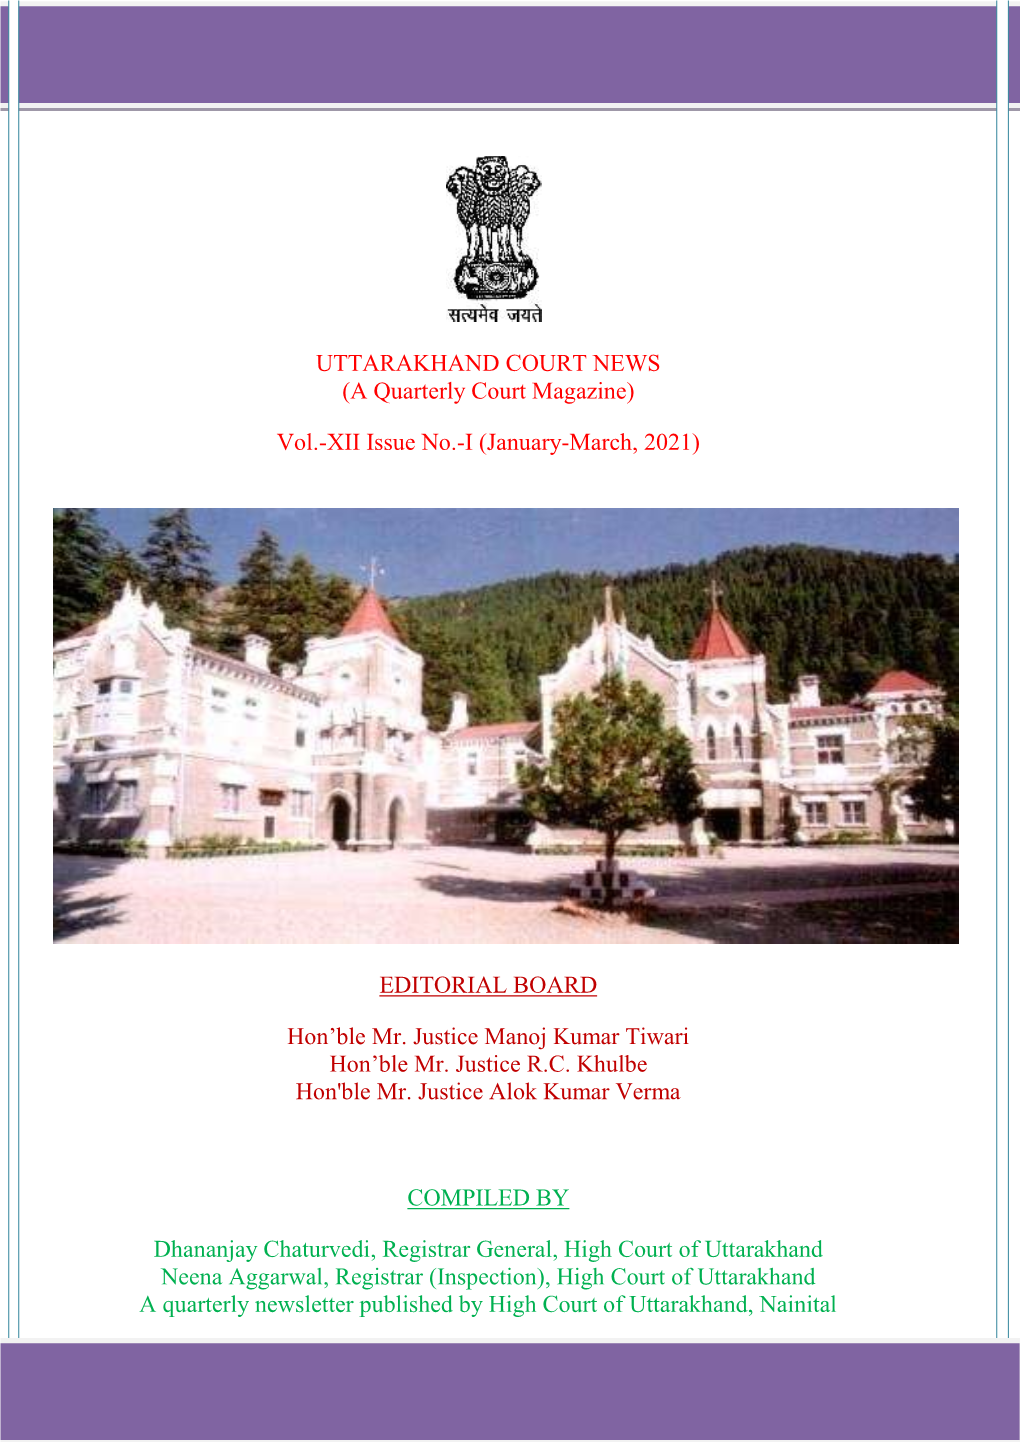 UTTARAKHAND COURT NEWS (A Quarterly Court Magazine) Vol.-XII Issue No.-I (January-March, 2021) EDITORIAL BOARD Hon'ble Mr